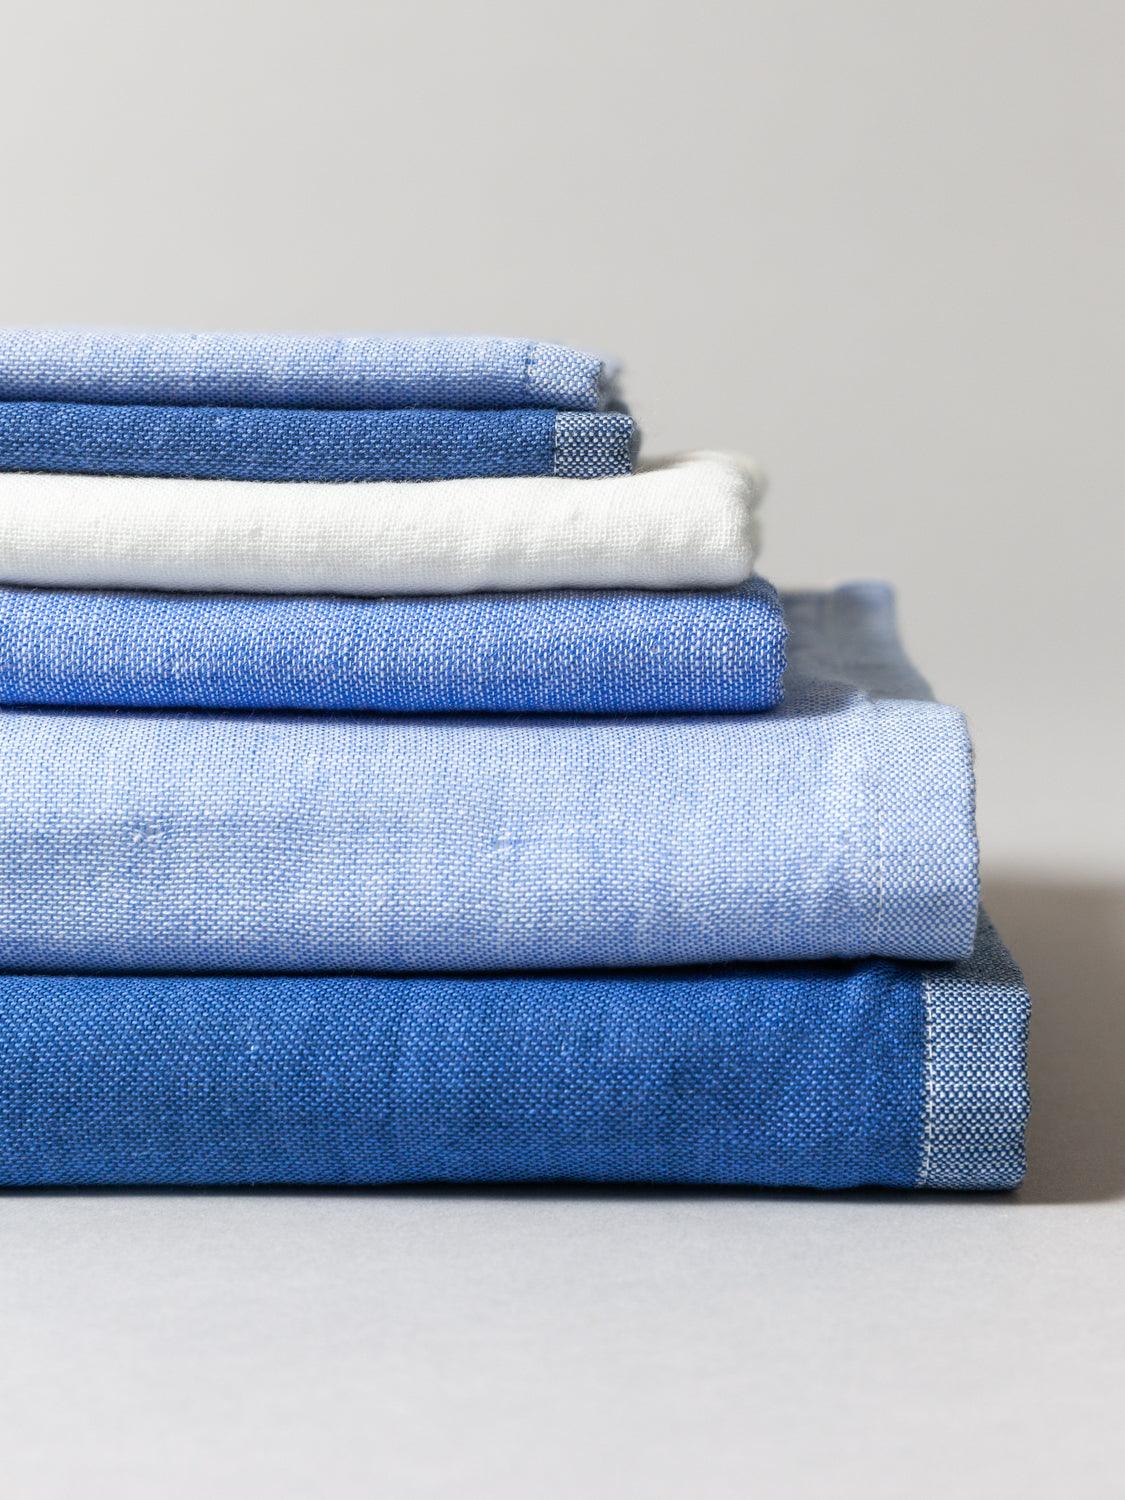 Wholesale Soft Color Combed Weave Bath Towels Manufacturers & Suppliers in  USA, UK, Australia